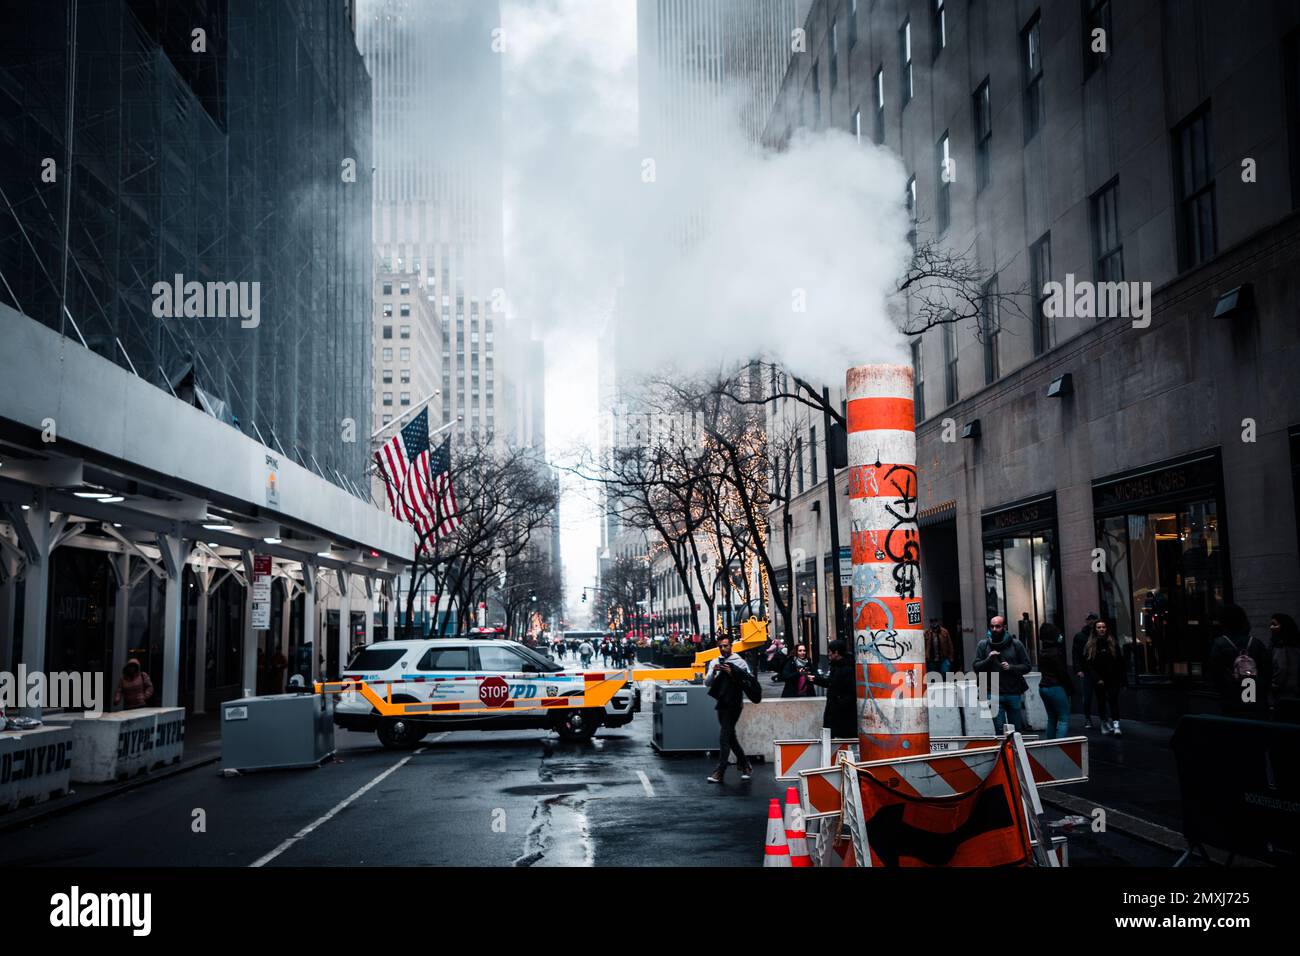 A closeup of a sewer with steam coming out in the streets of Manhattan, New York City Stock Photo